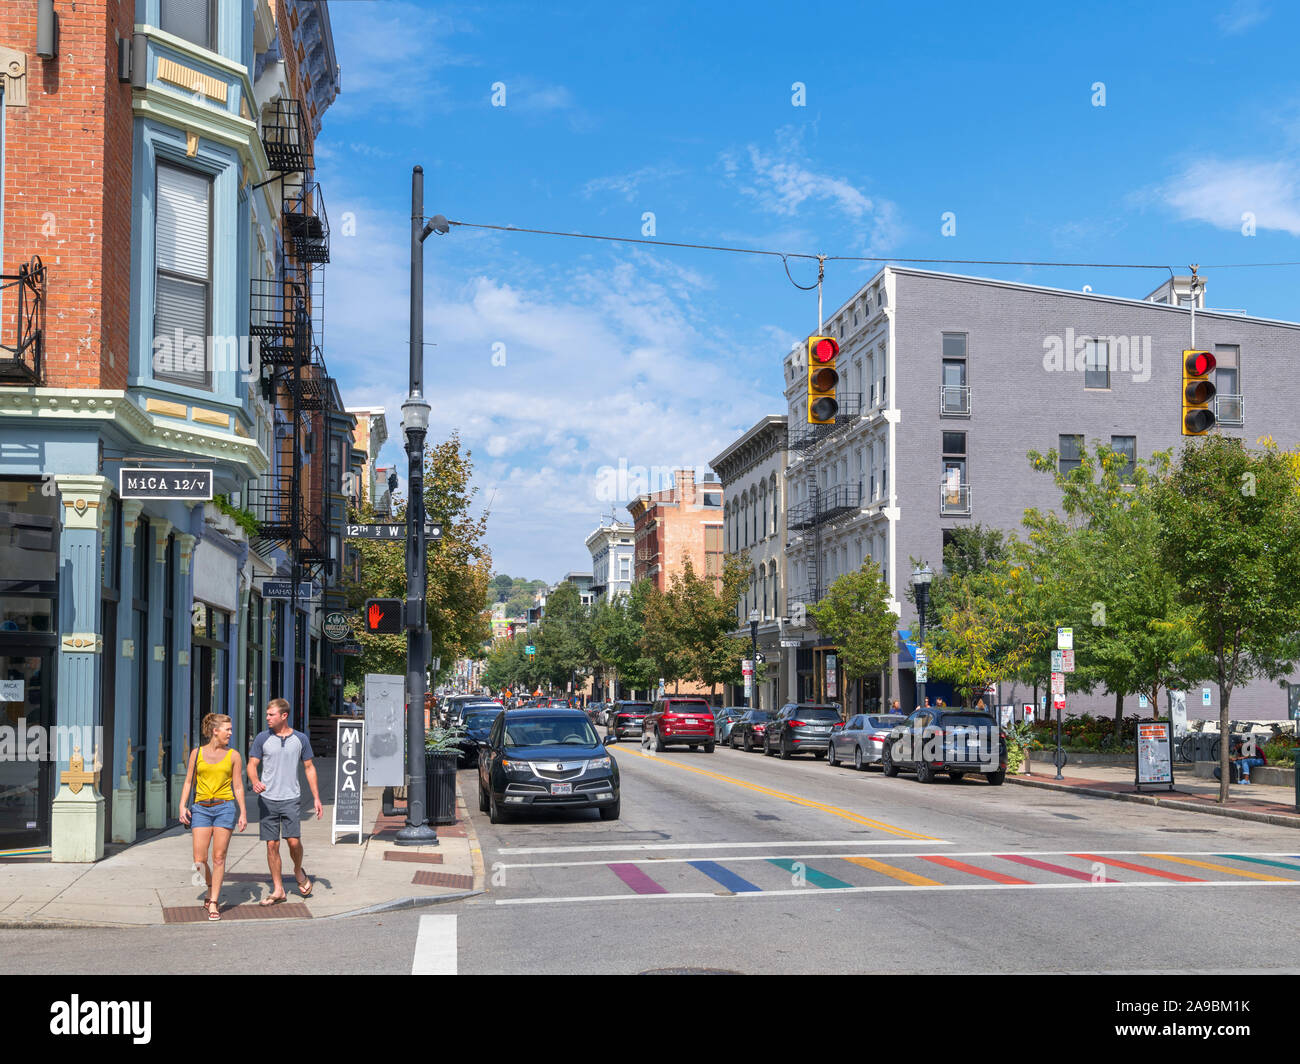 Vine Street at the intersection with 12th St in the historic Over-the-Rhine district, Cincinnati, Ohio, USA. Stock Photo